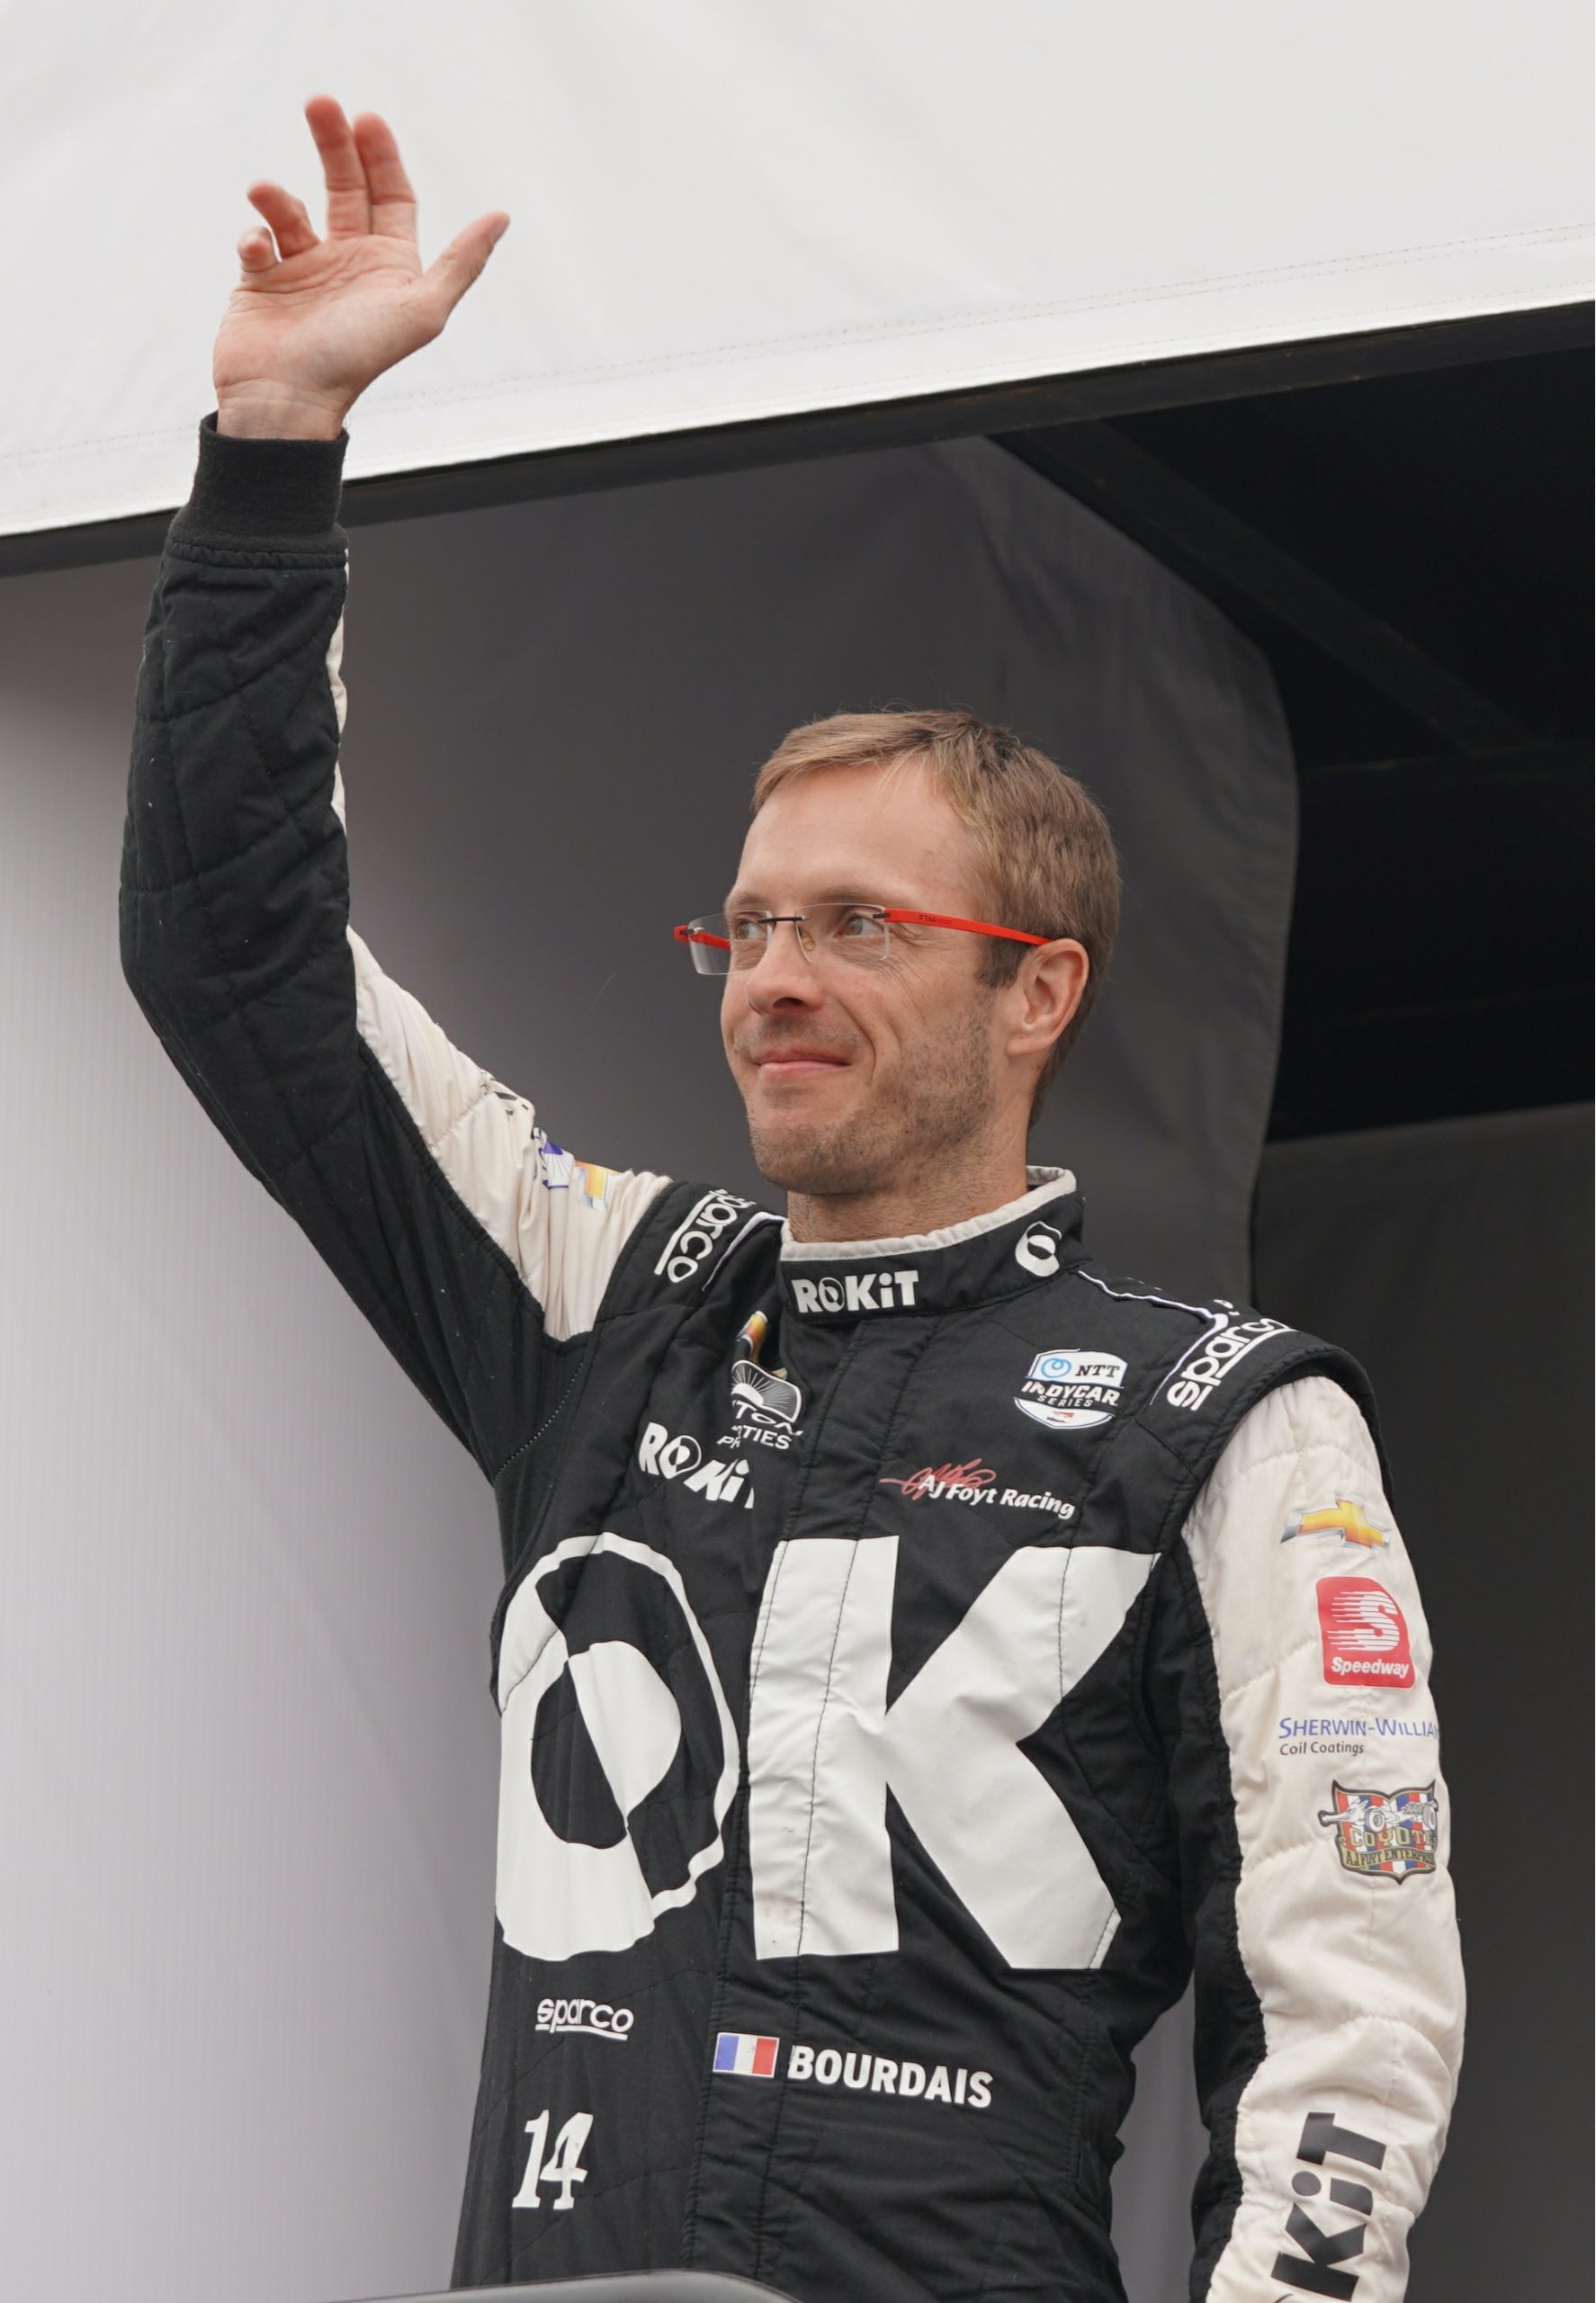 Sebastien Bourdais waves to the fans before the start of the Acura Grand Prix of Long Beach. Could this be his last NTT IndyCar Series race?